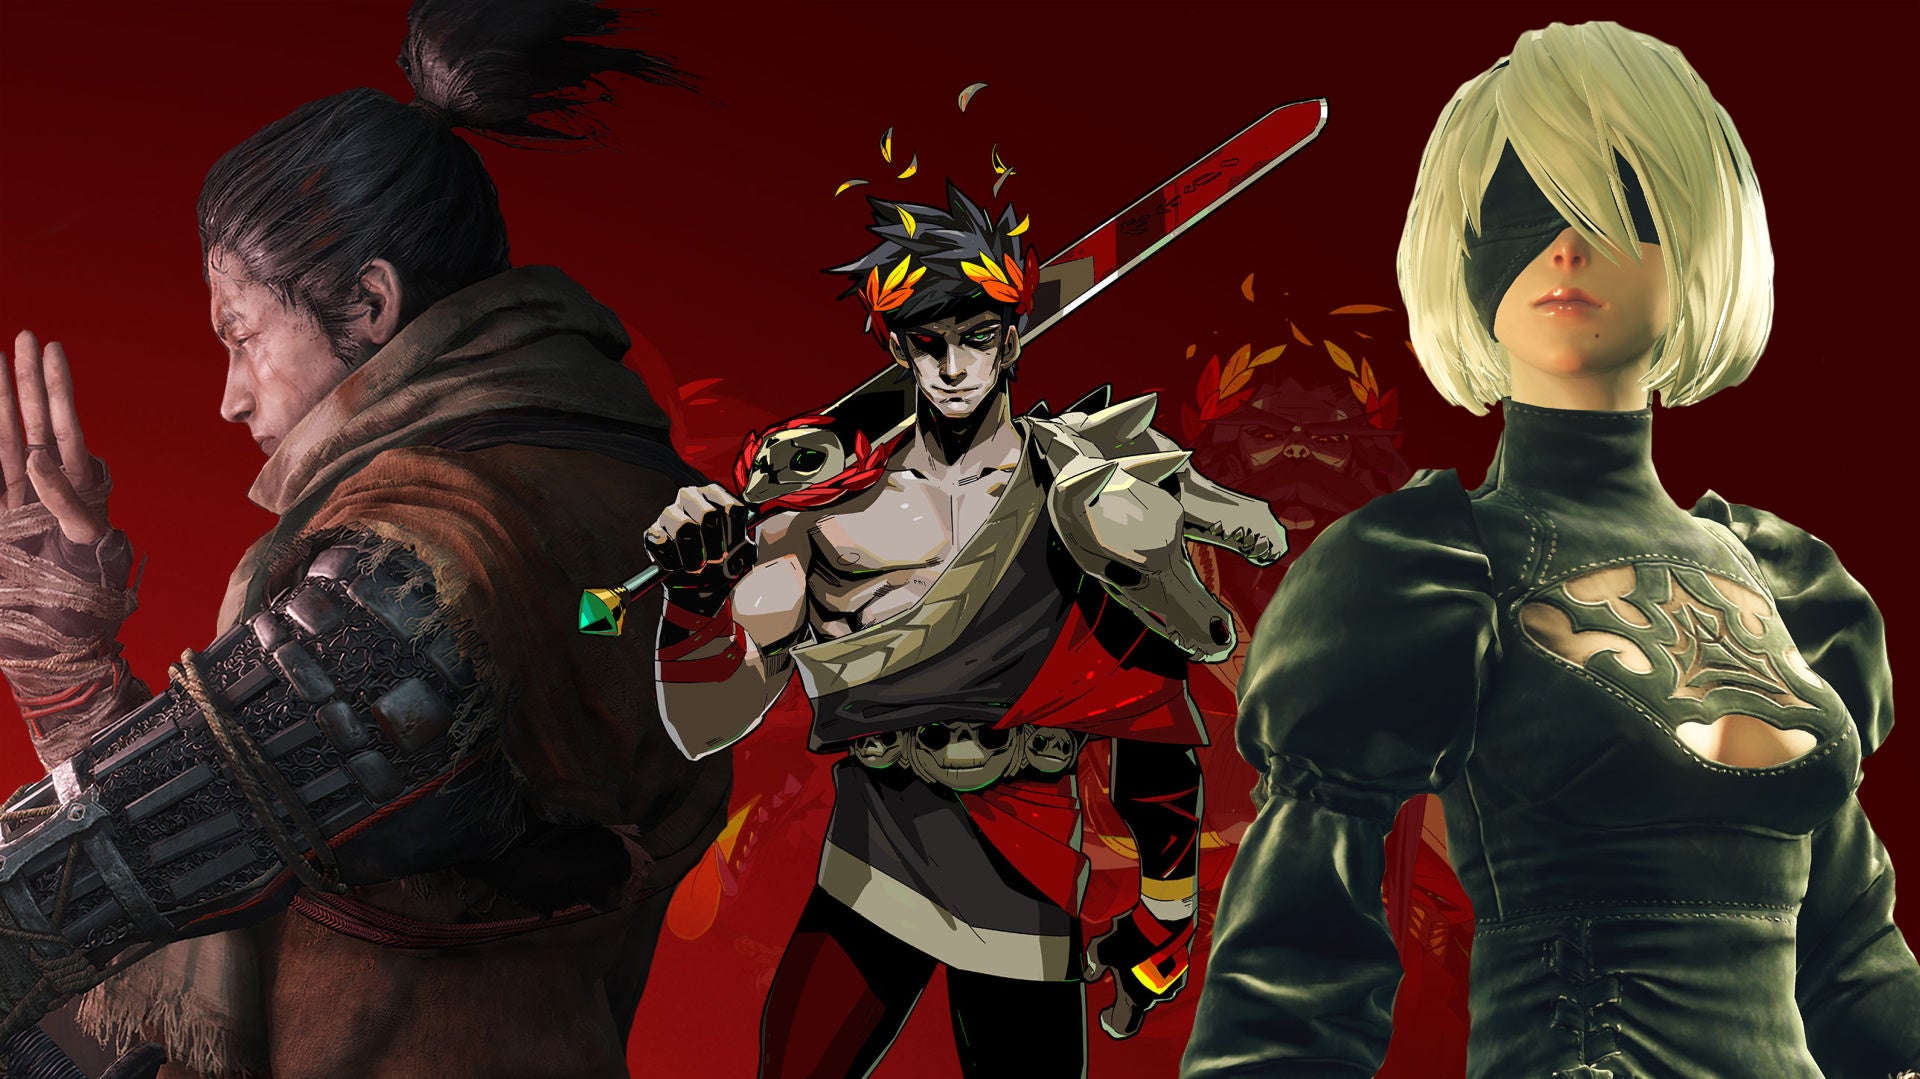 Artwork from Sekiro, Hades and Nier Automata form our Best Action Games header